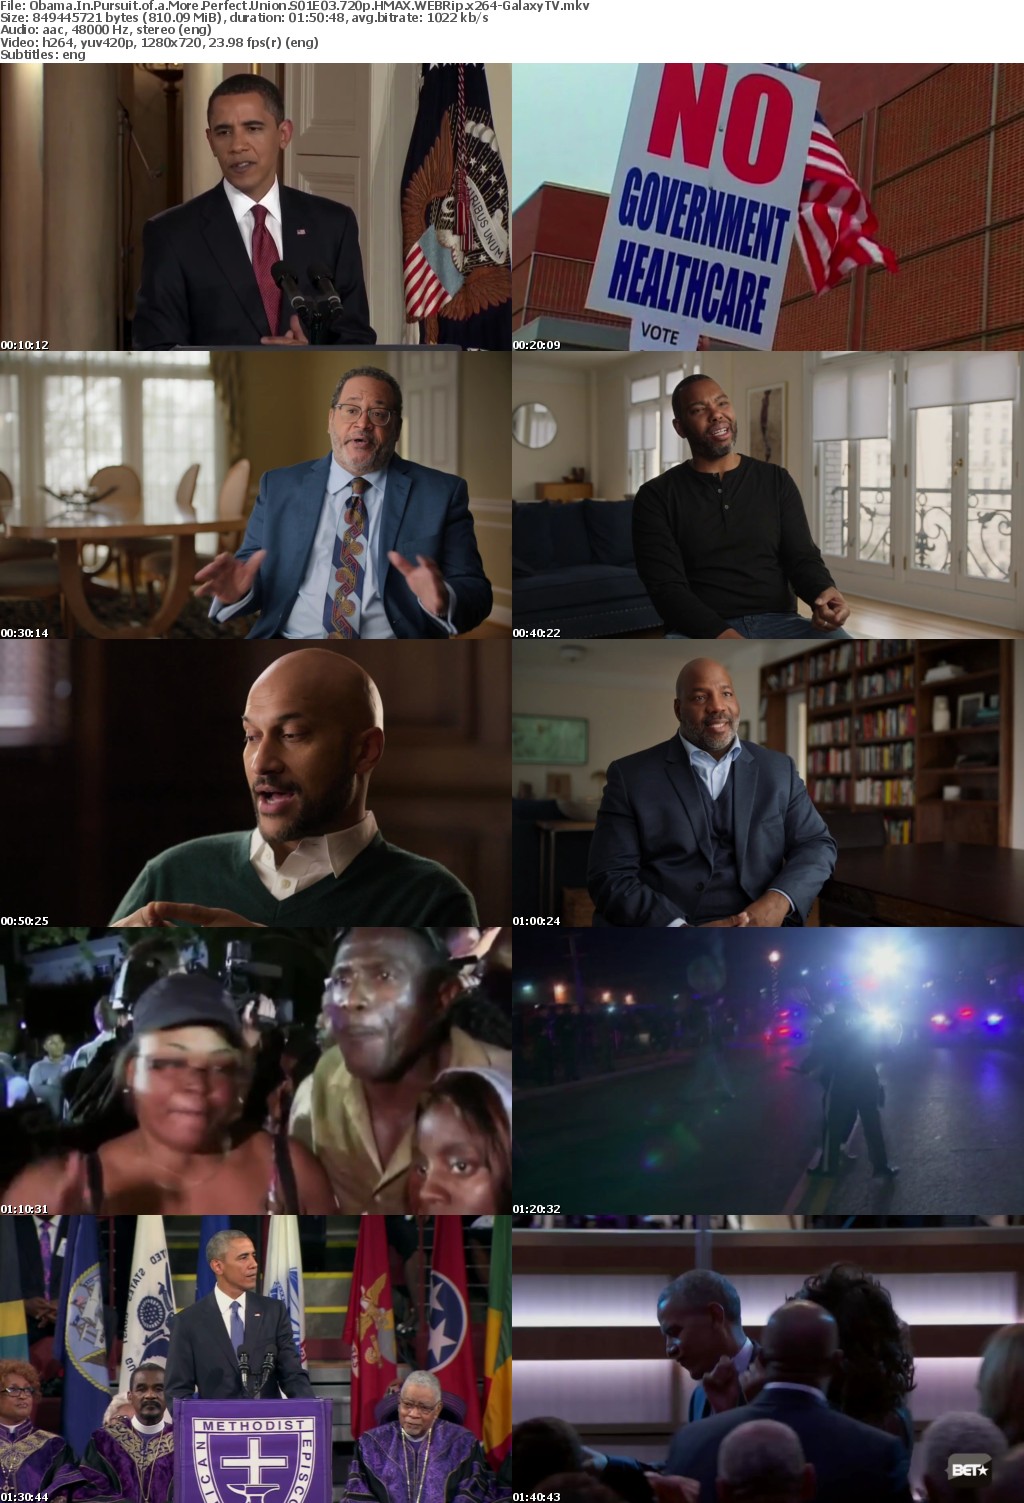 Obama In Pursuit of a More Perfect Union S01 COMPLETE 720p HMAX WEBRip x264-GalaxyTV